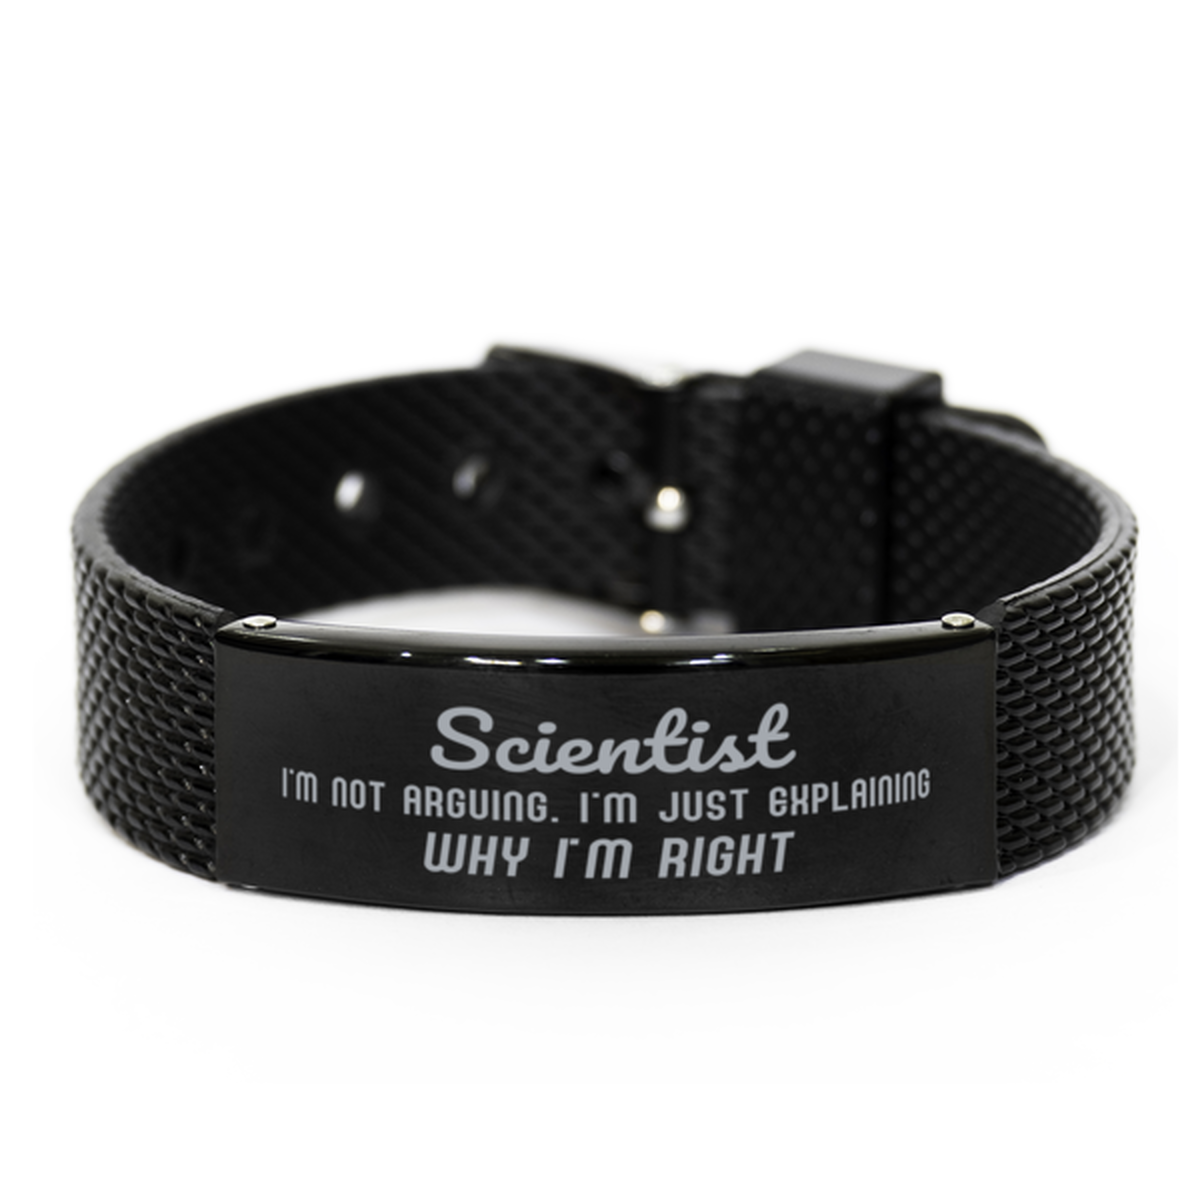 Scientist I'm not Arguing. I'm Just Explaining Why I'm RIGHT Black Shark Mesh Bracelet, Funny Saying Quote Scientist Gifts For Scientist Graduation Birthday Christmas Gifts for Men Women Coworker